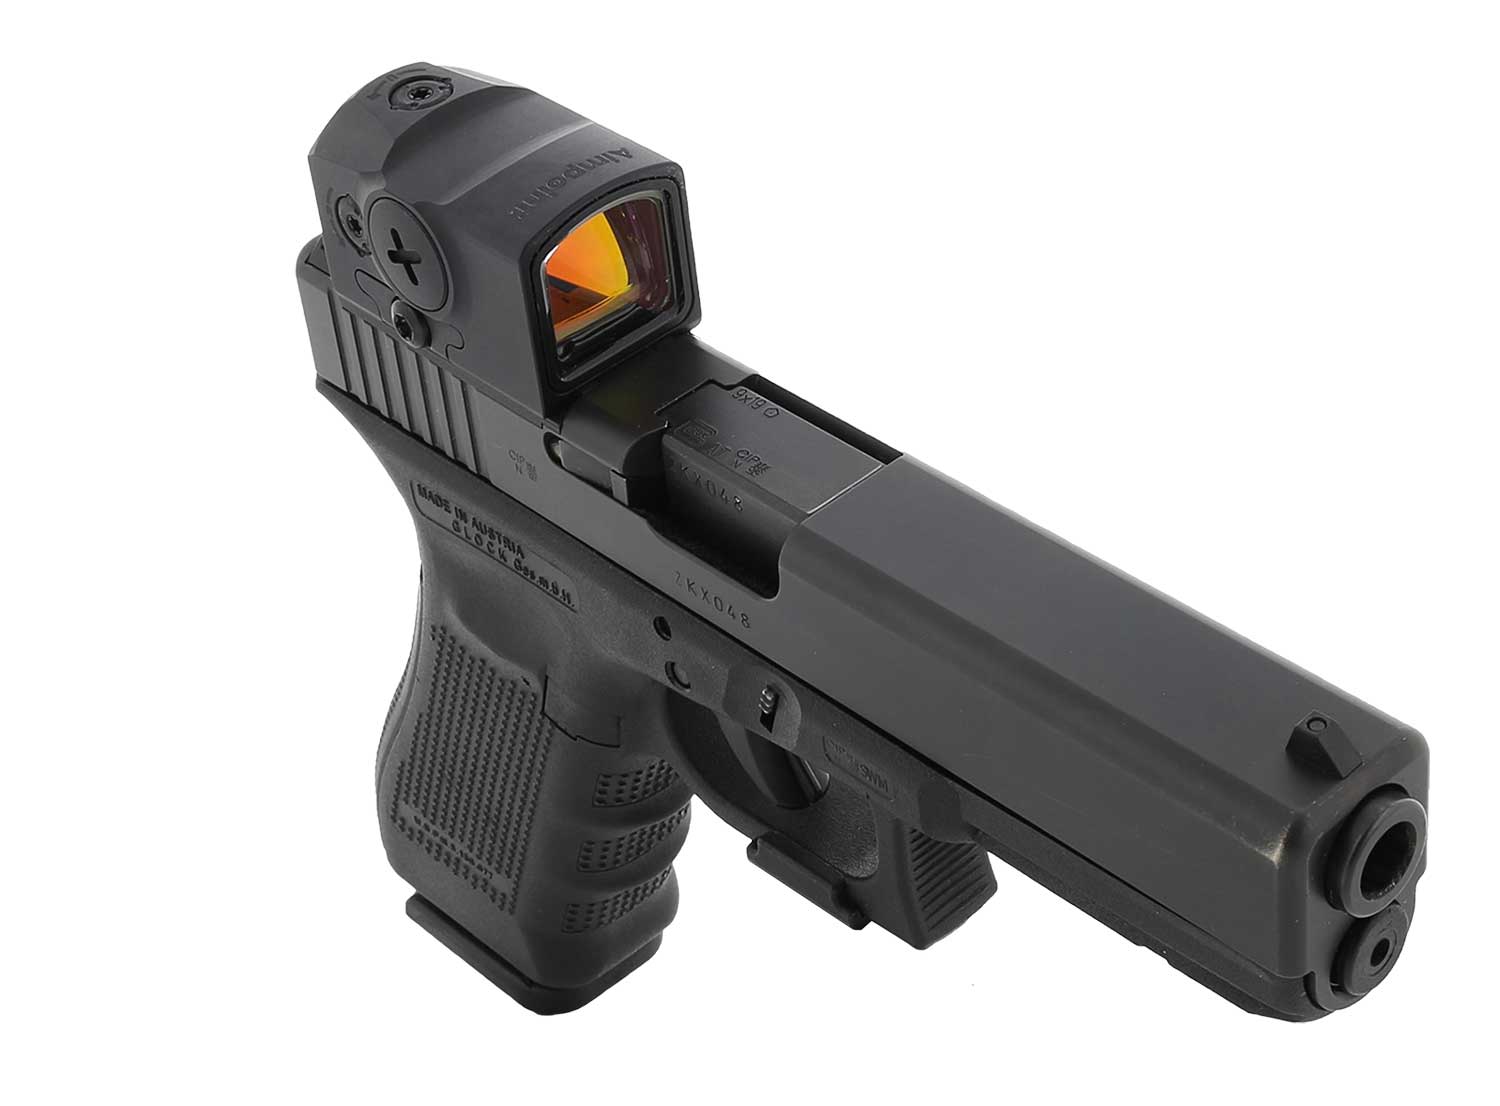 A handgun fitted with an Aimpoint red dot sight.